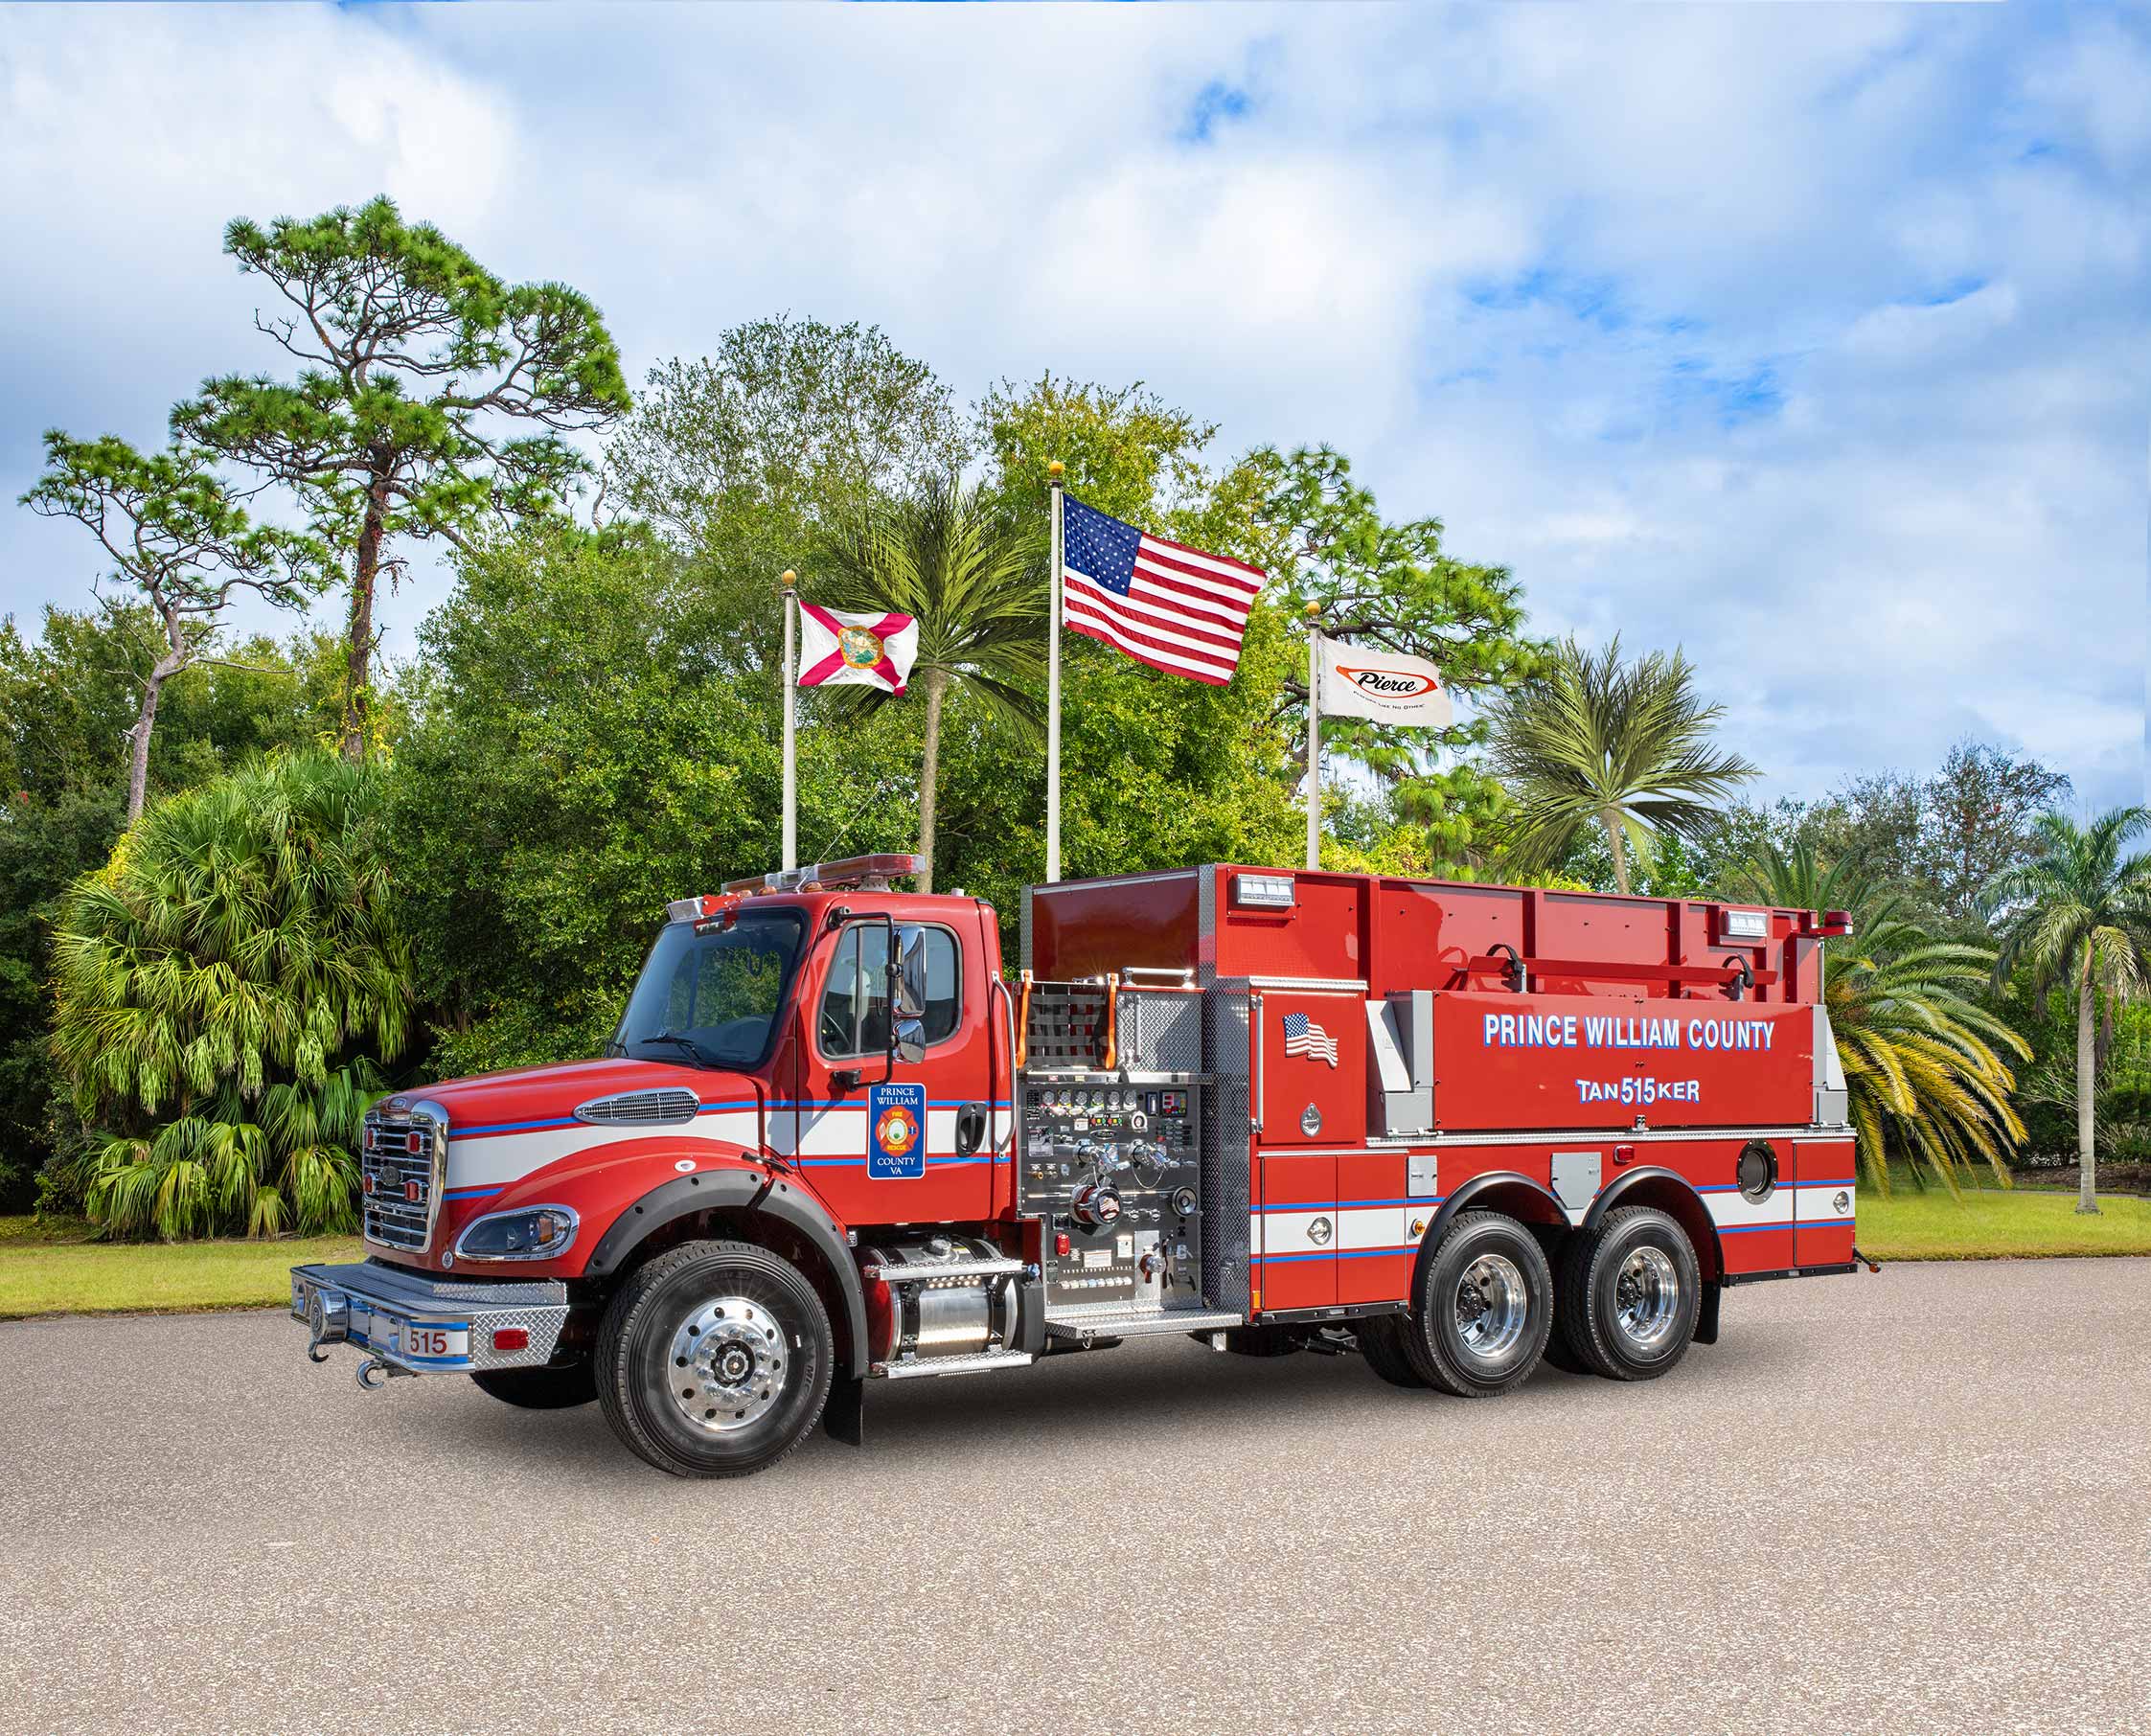 Prince William County Department of Fire & Rescue - Tanker